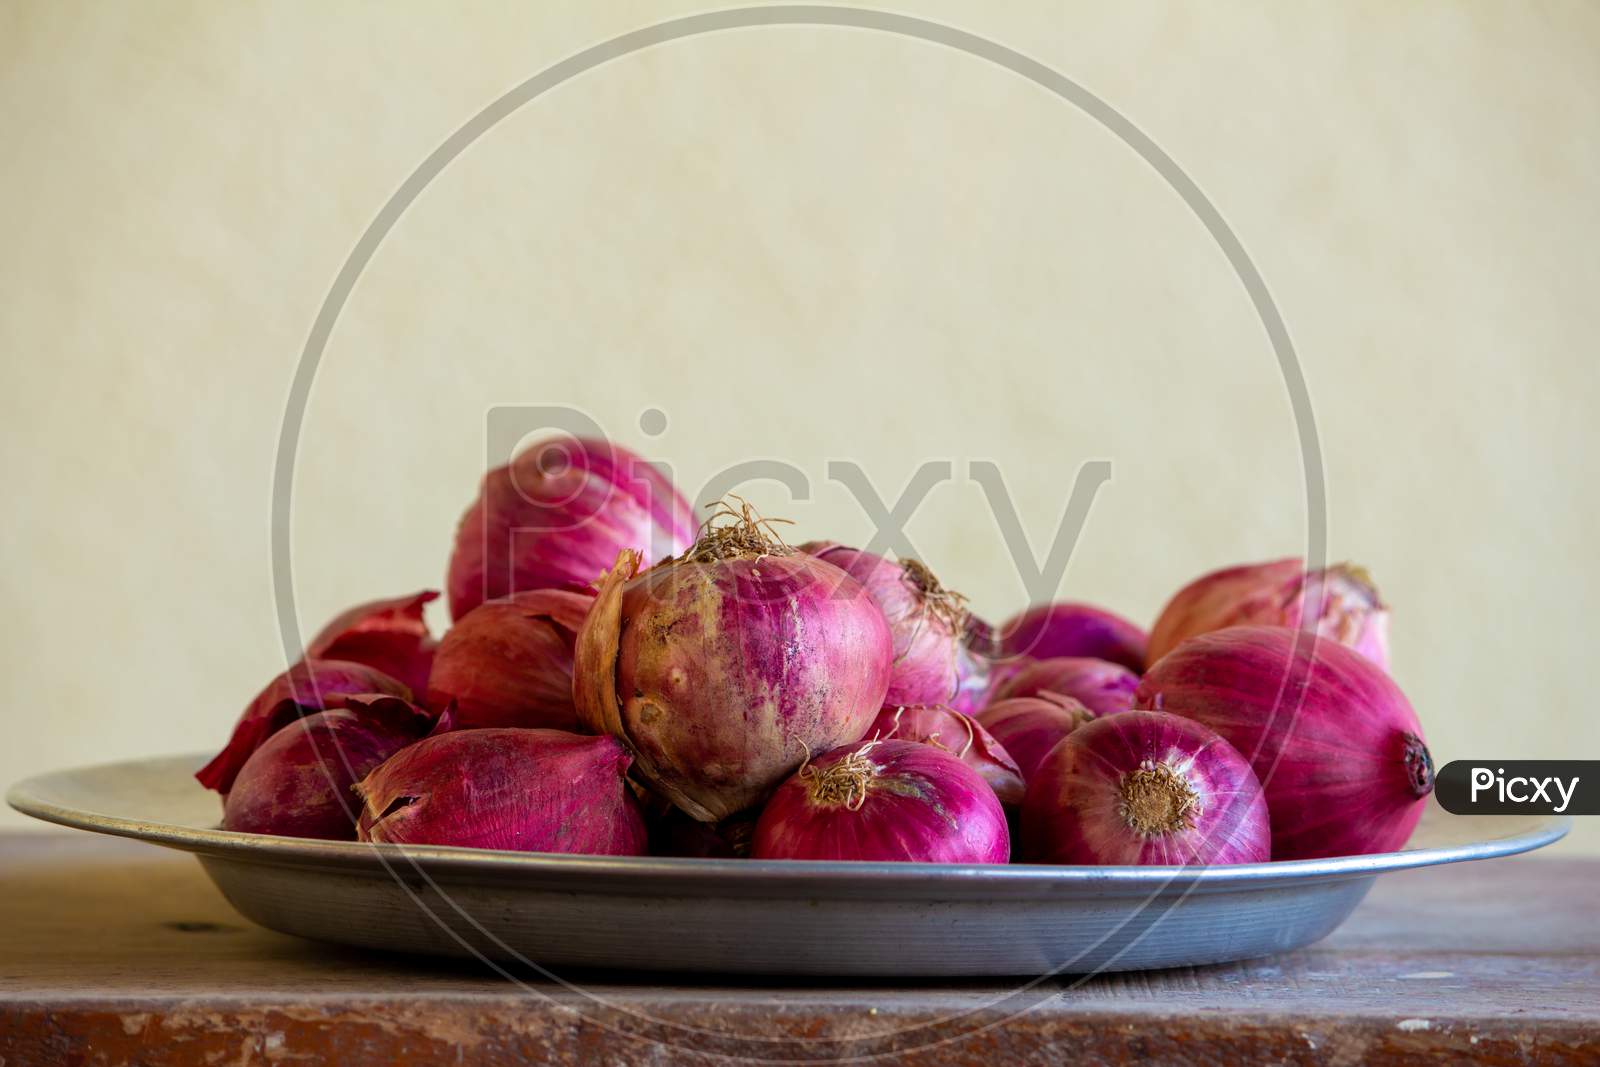 View Of Red Onions In A Plate Over A Wooden Table